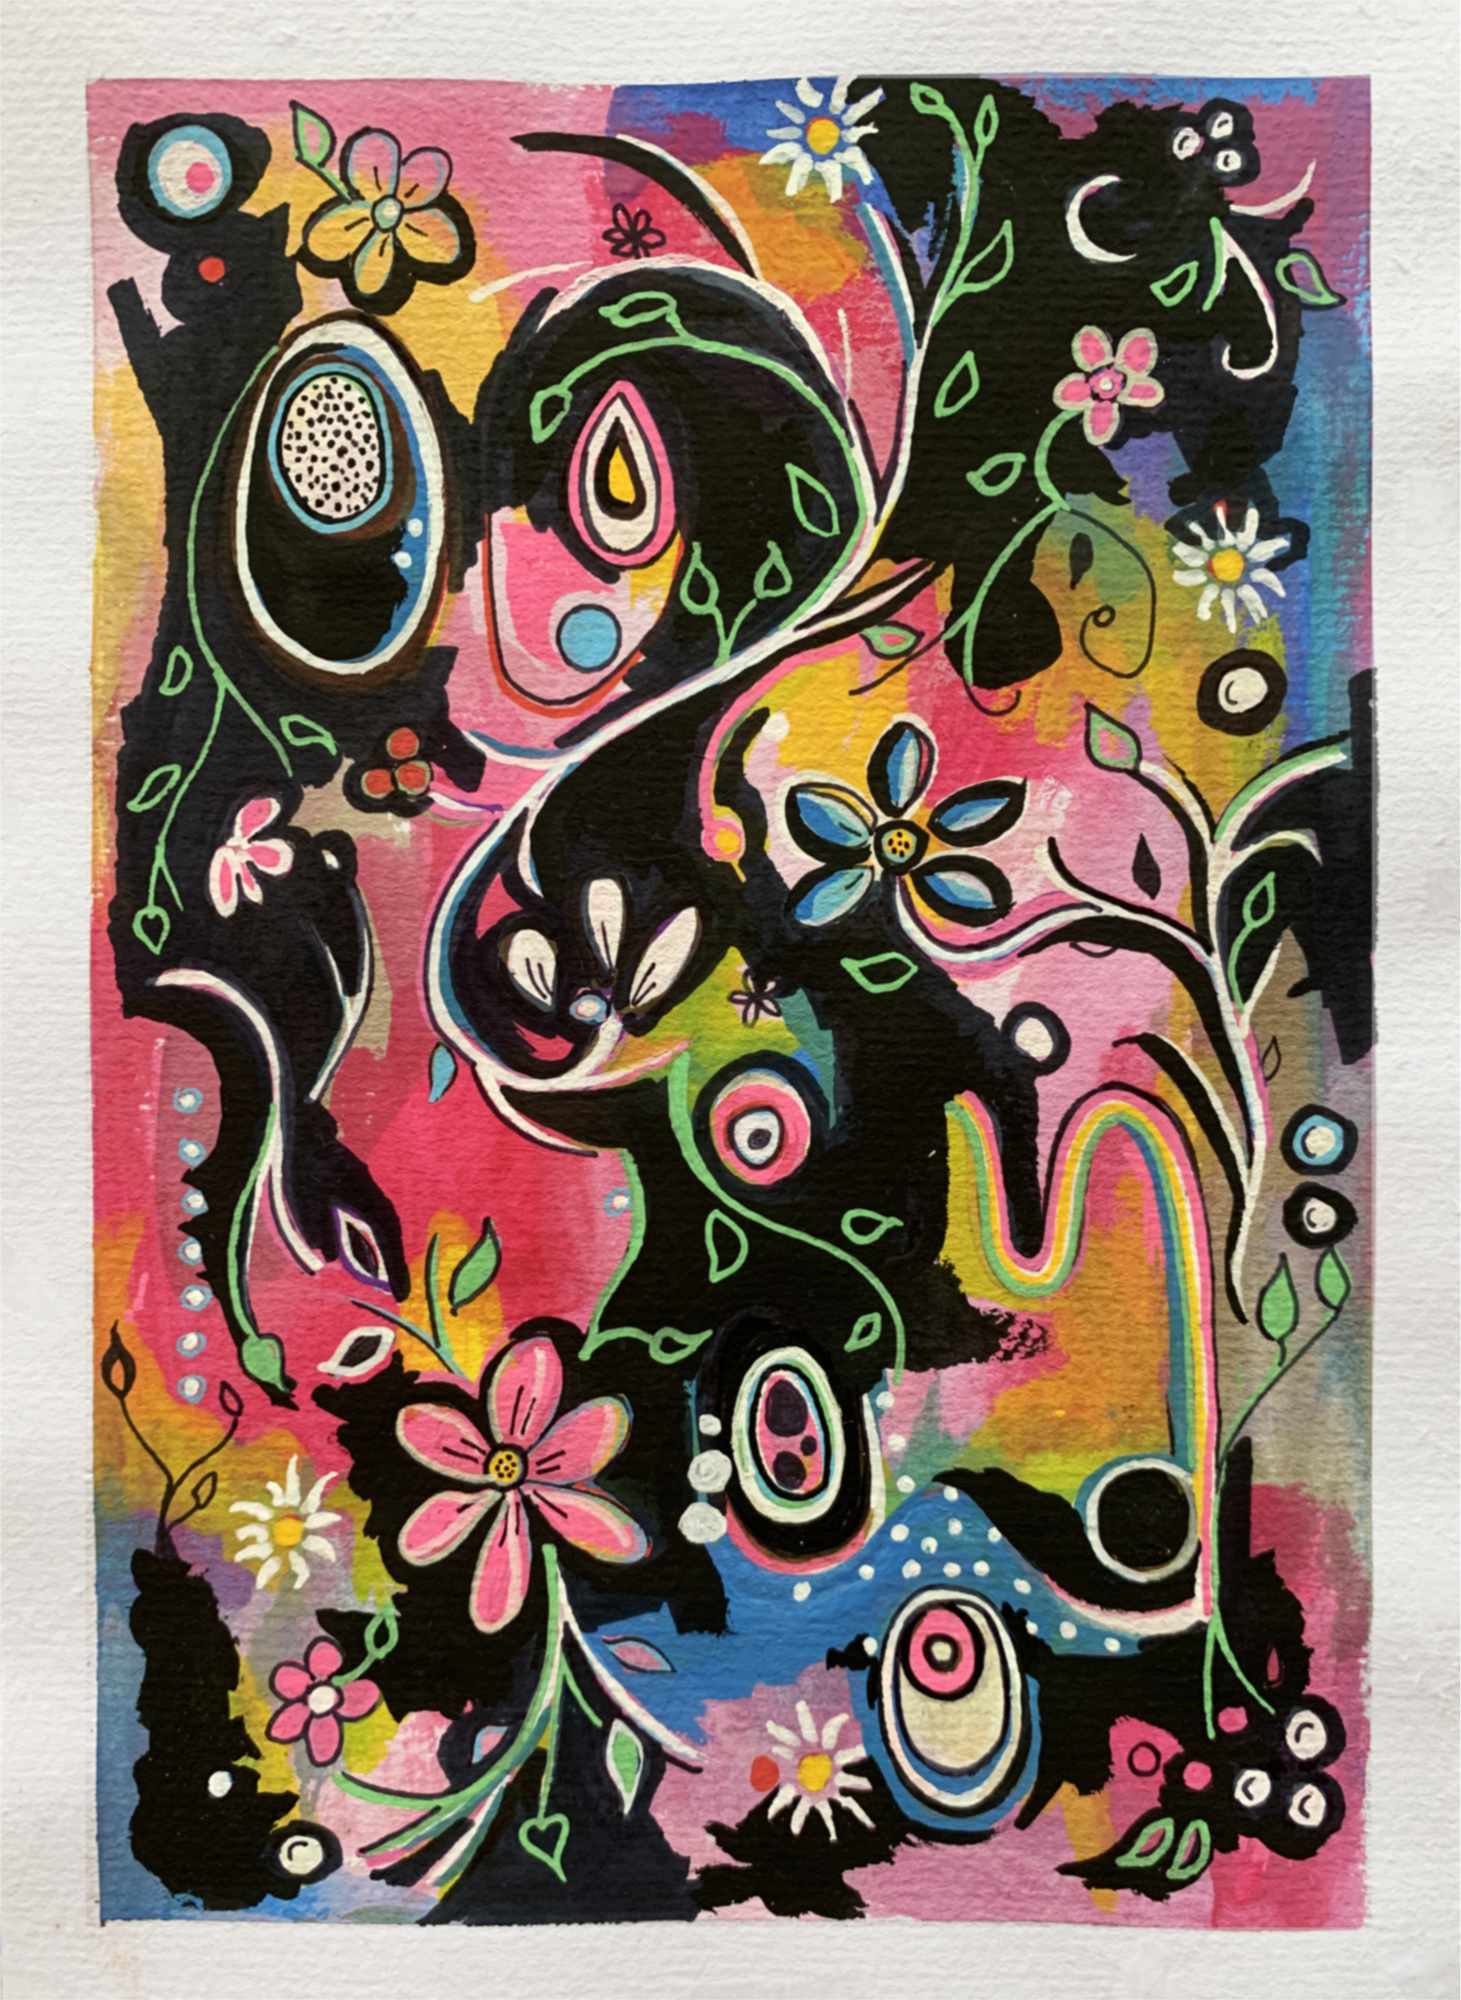 art every day number 688 / gouache & acrylic painting / midnight garden